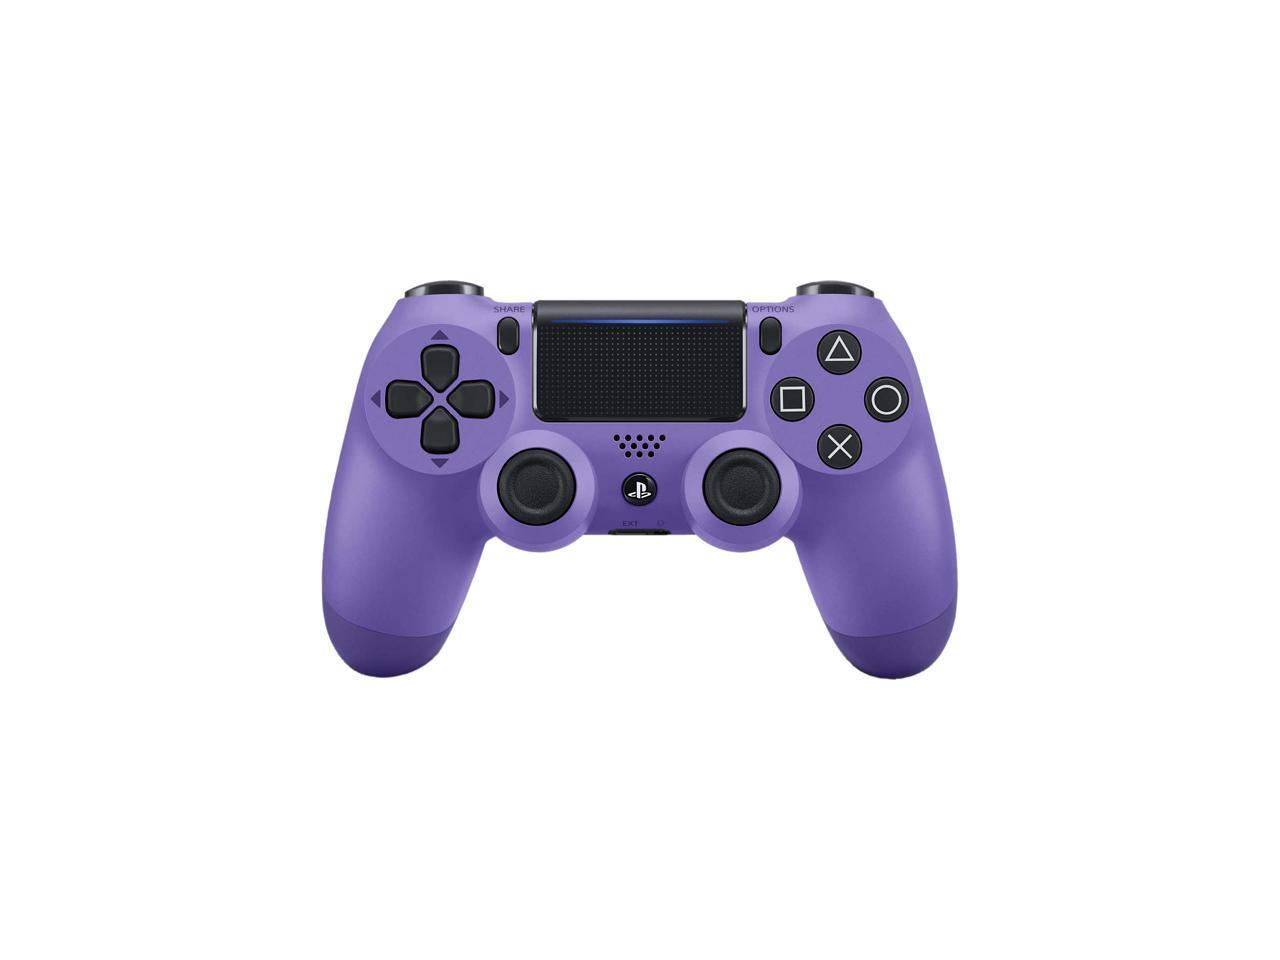 OEM DualShock 4 Wireless Controller for Sony PlayStation 4 - Electric Purple (CUH-ZCT2)